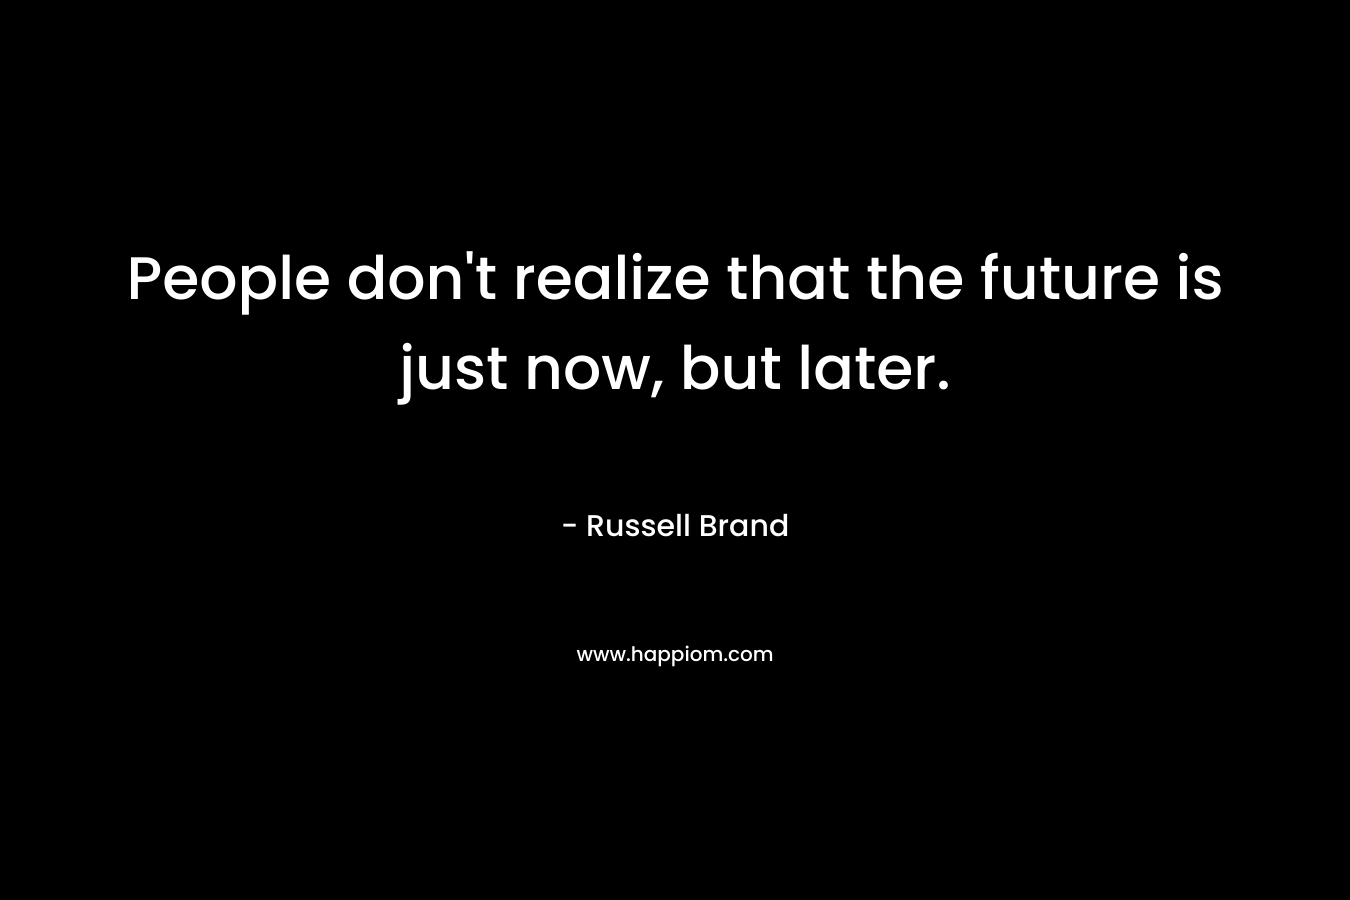 People don’t realize that the future is just now, but later. – Russell Brand